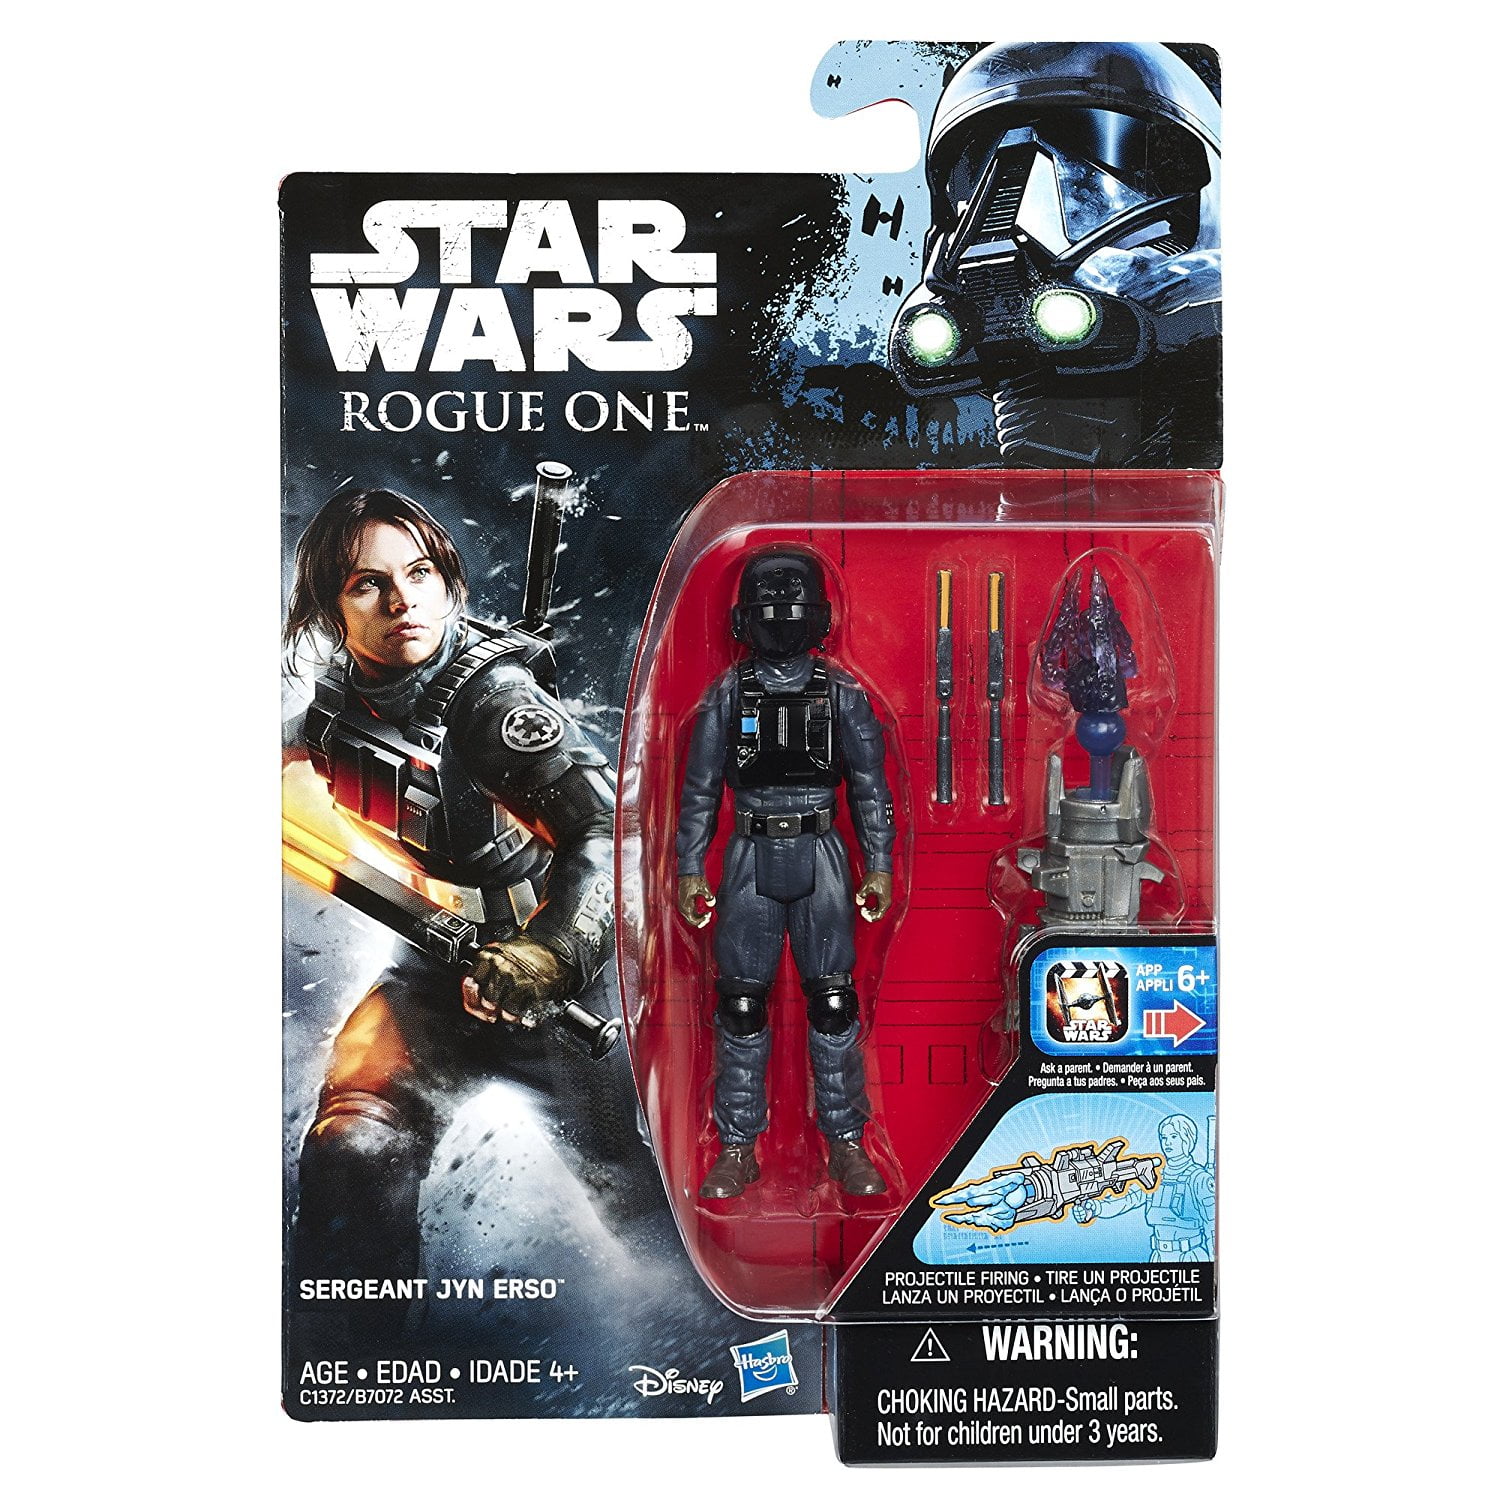 Hasbro Star Wars Rogue One 12-Inch Sergeant Jyn Erso Action Figure for sale online 